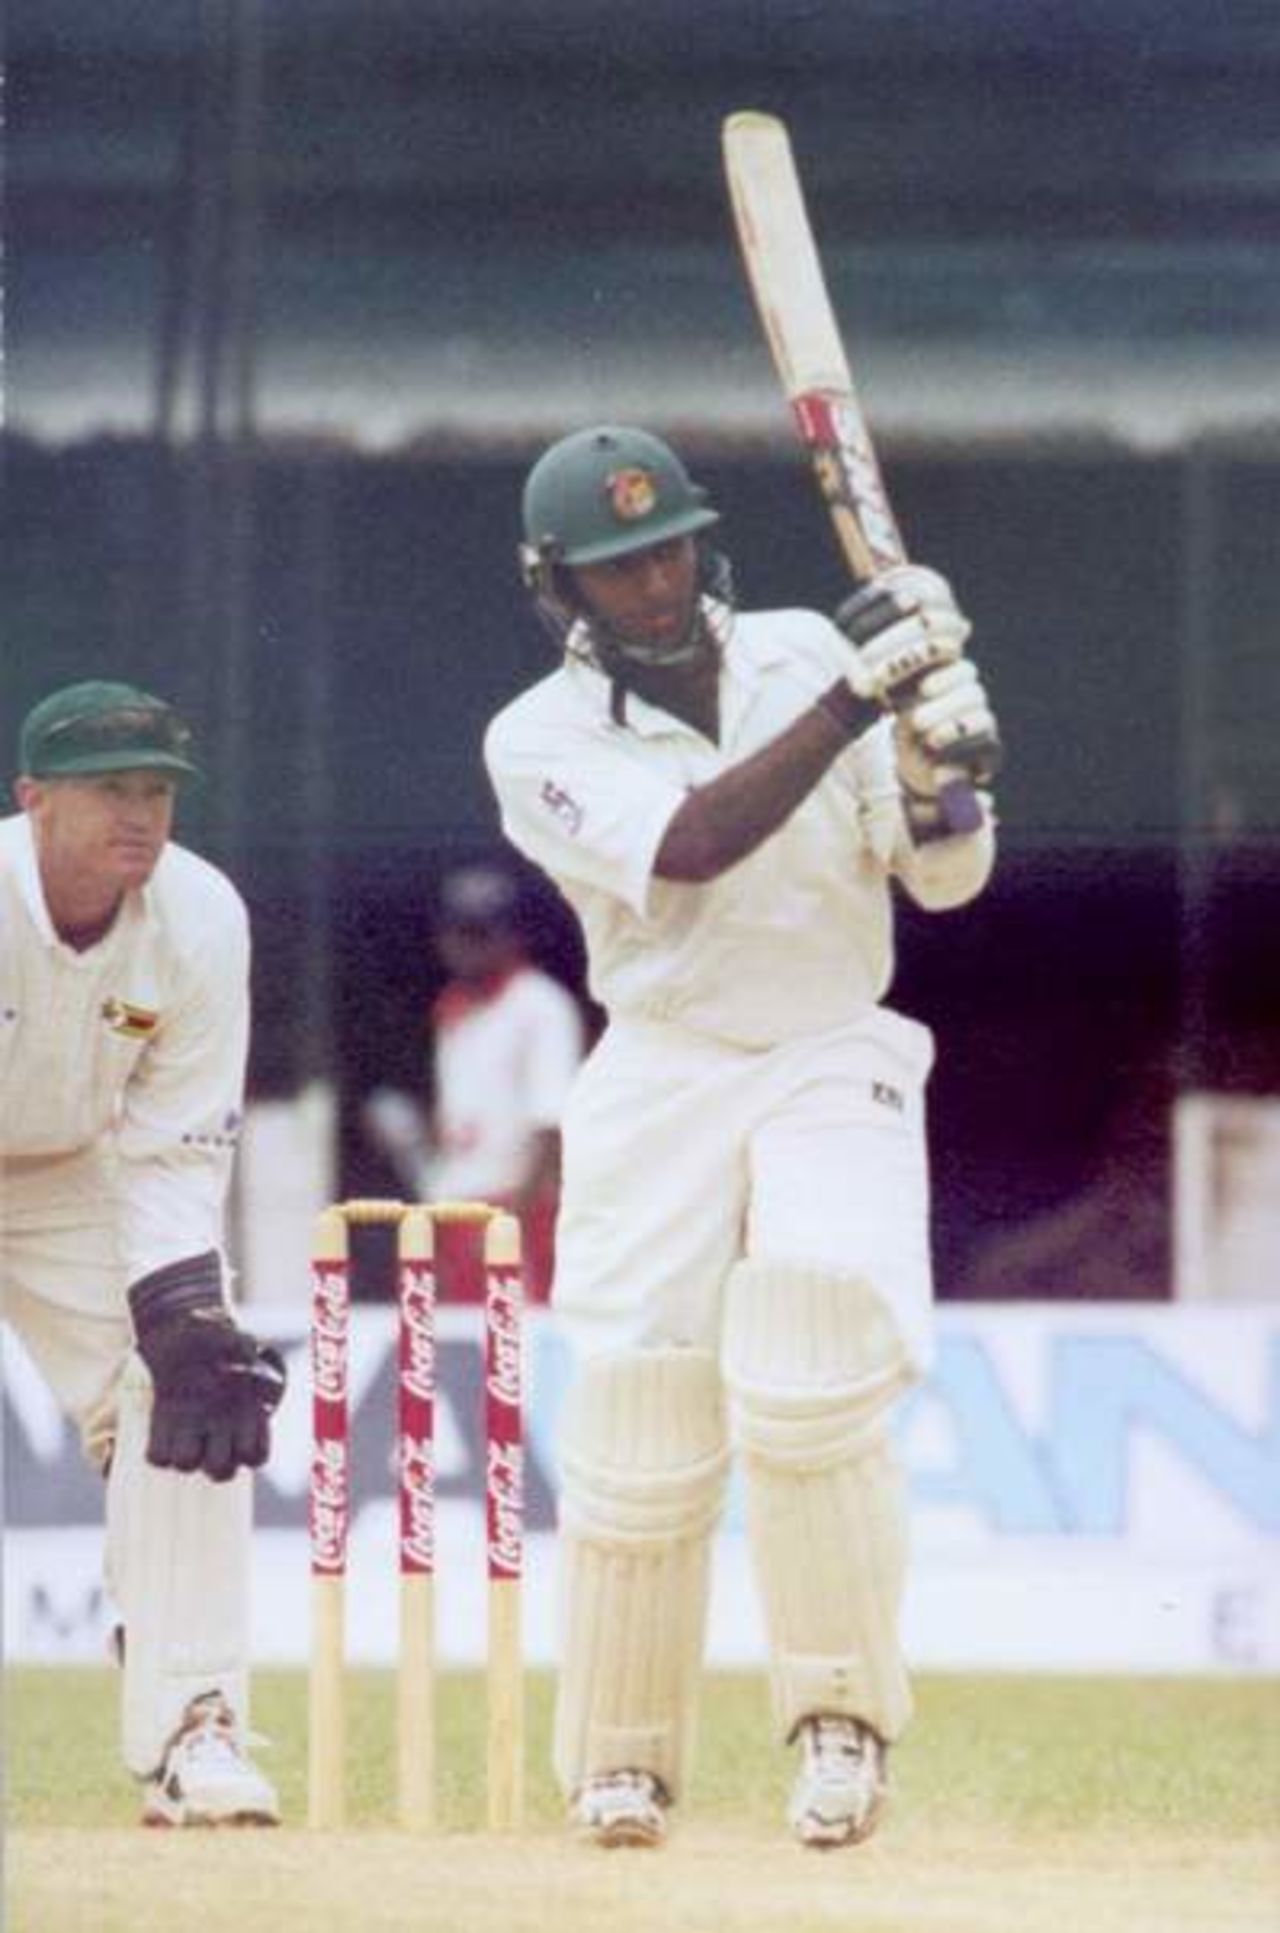 Javed Omer hits the ball in perfection